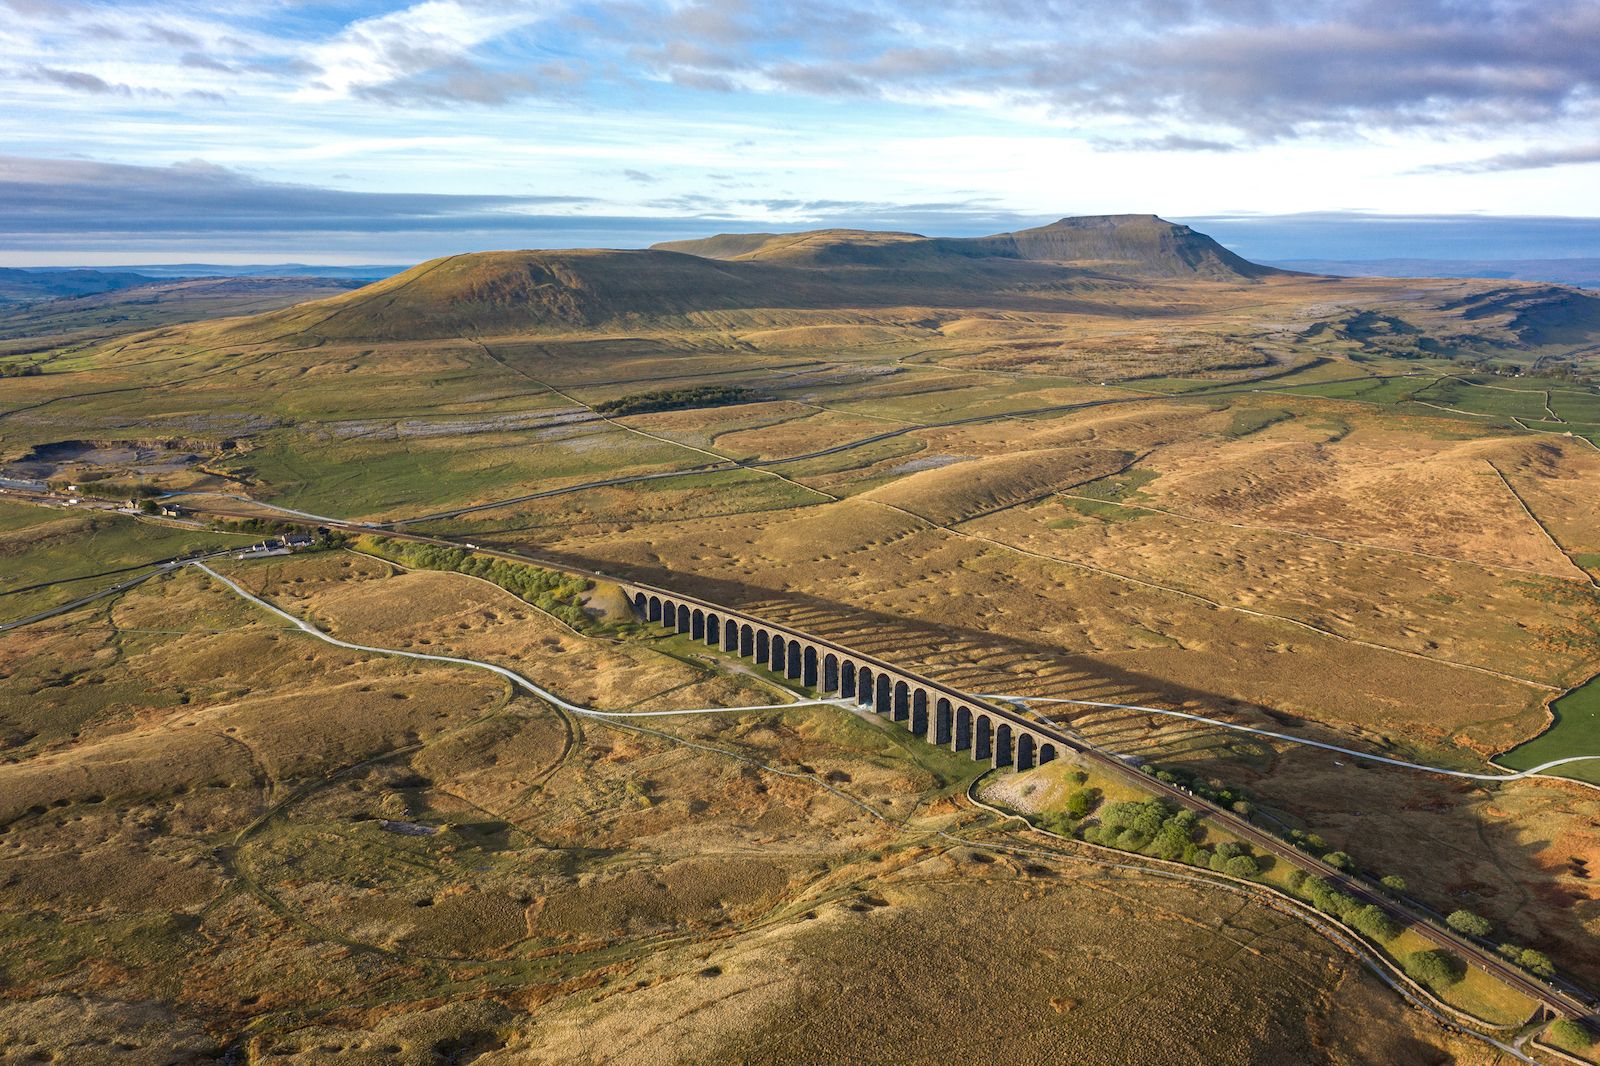 A view of Ingleborough, the Ribblehead Viaduct and Horton-in-Ribblesdale, on the Yorkshire Three Peaks route.